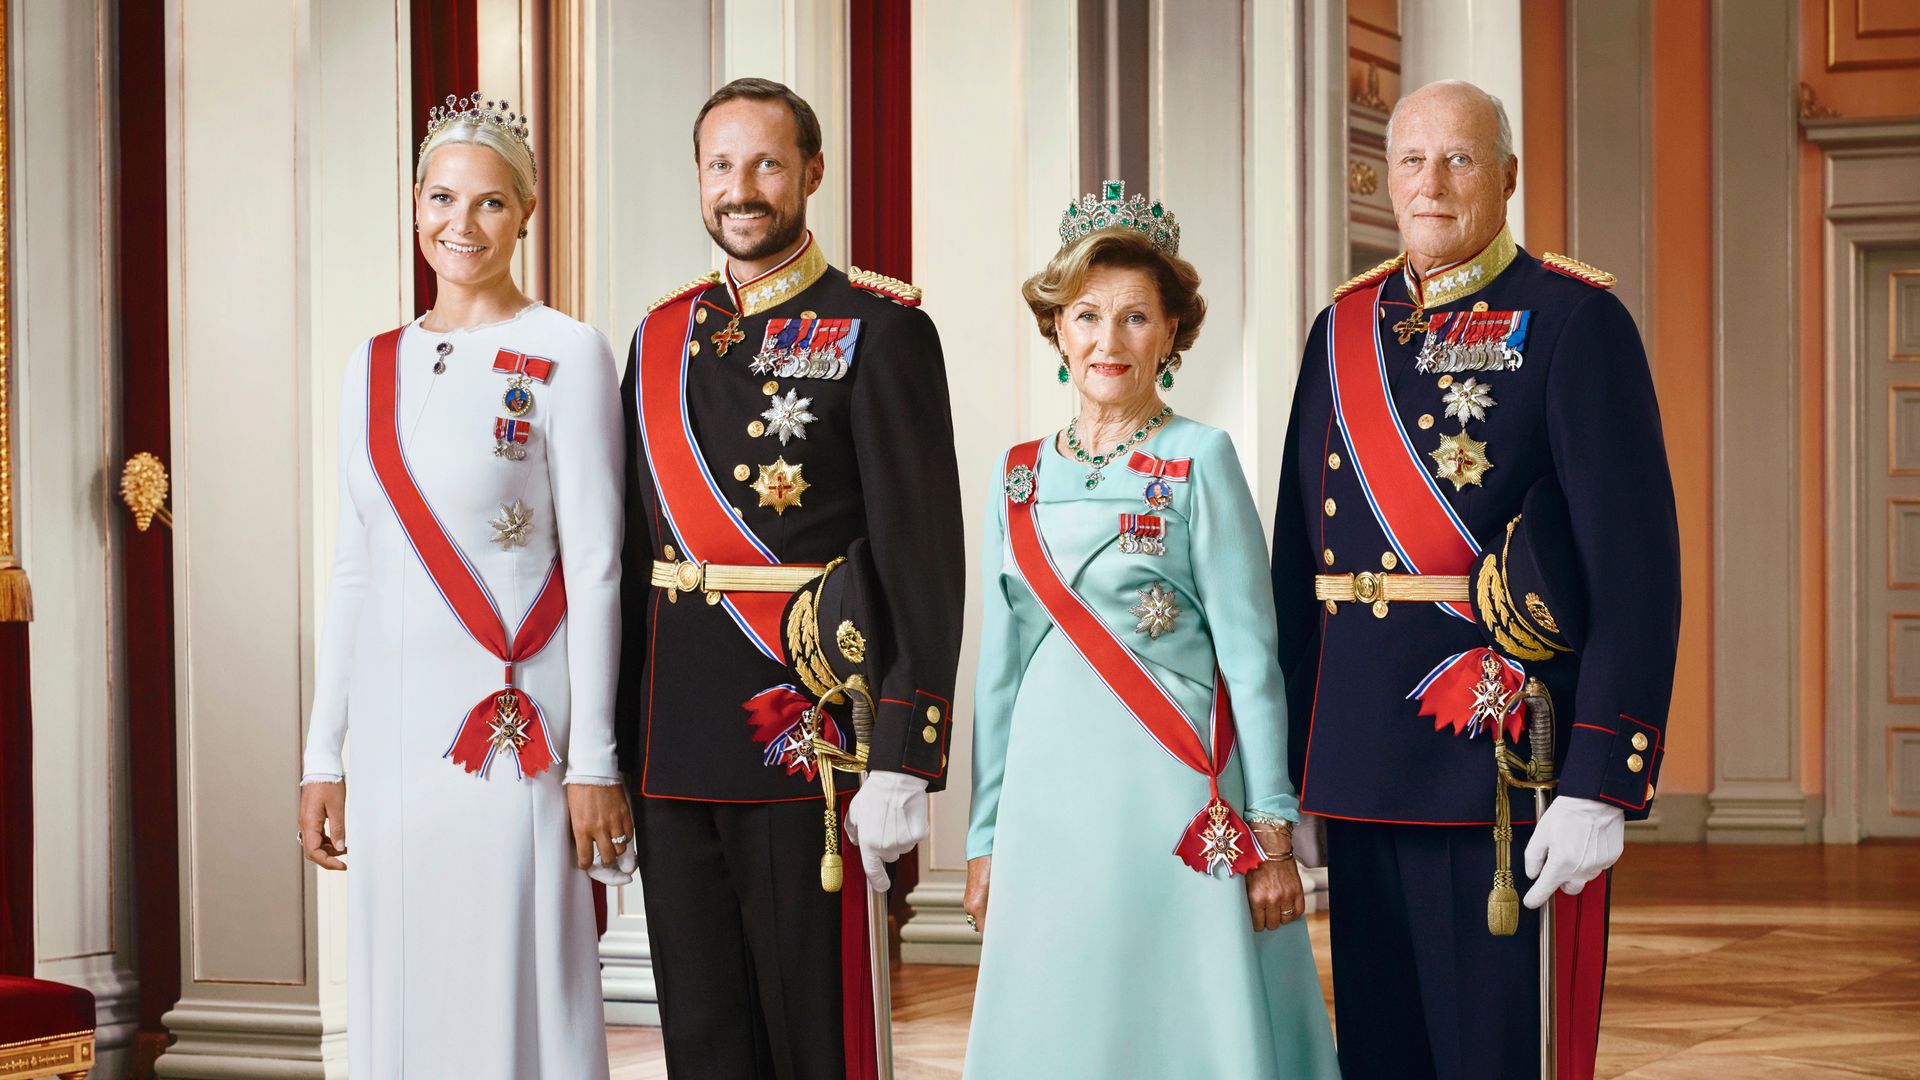 2016 portrait of Princess Mette-Marit of Norway, Crown Prince Haakon of Norway, Queen Sonja of Norway and King Harald V of Norway 